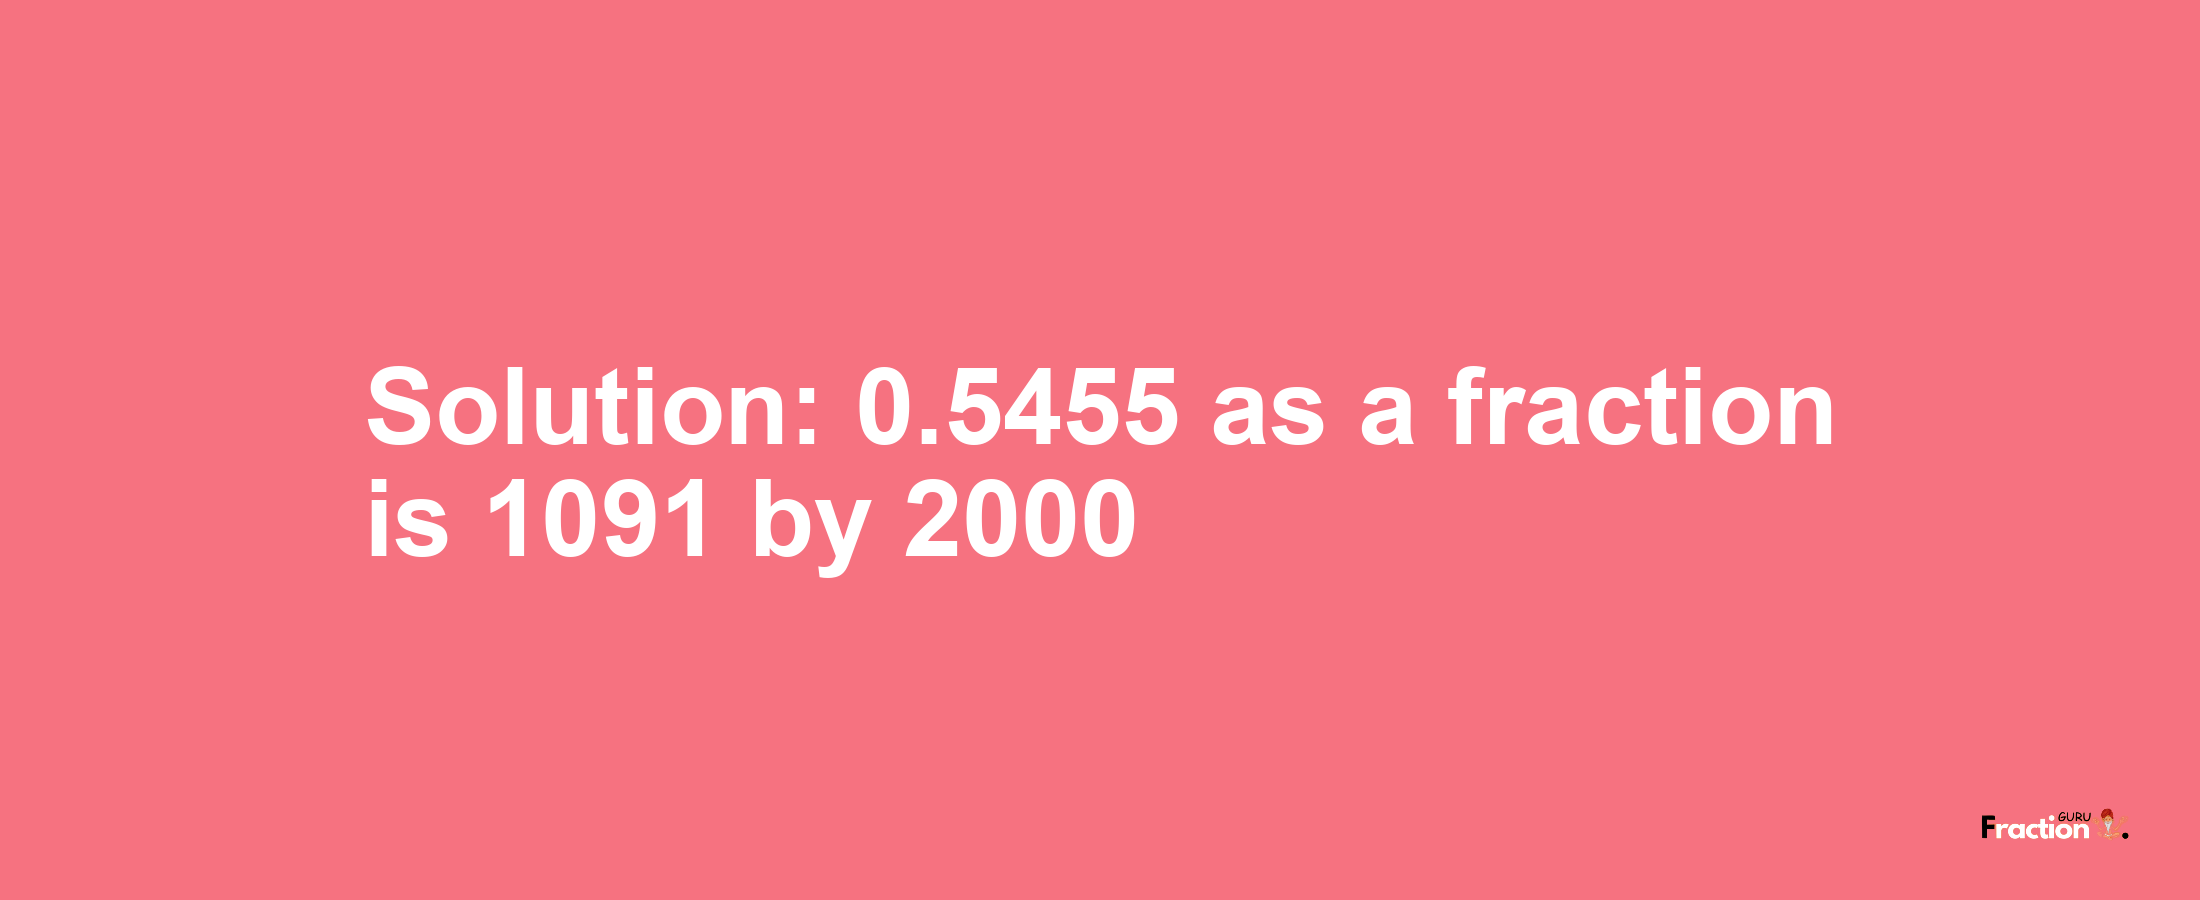 Solution:0.5455 as a fraction is 1091/2000